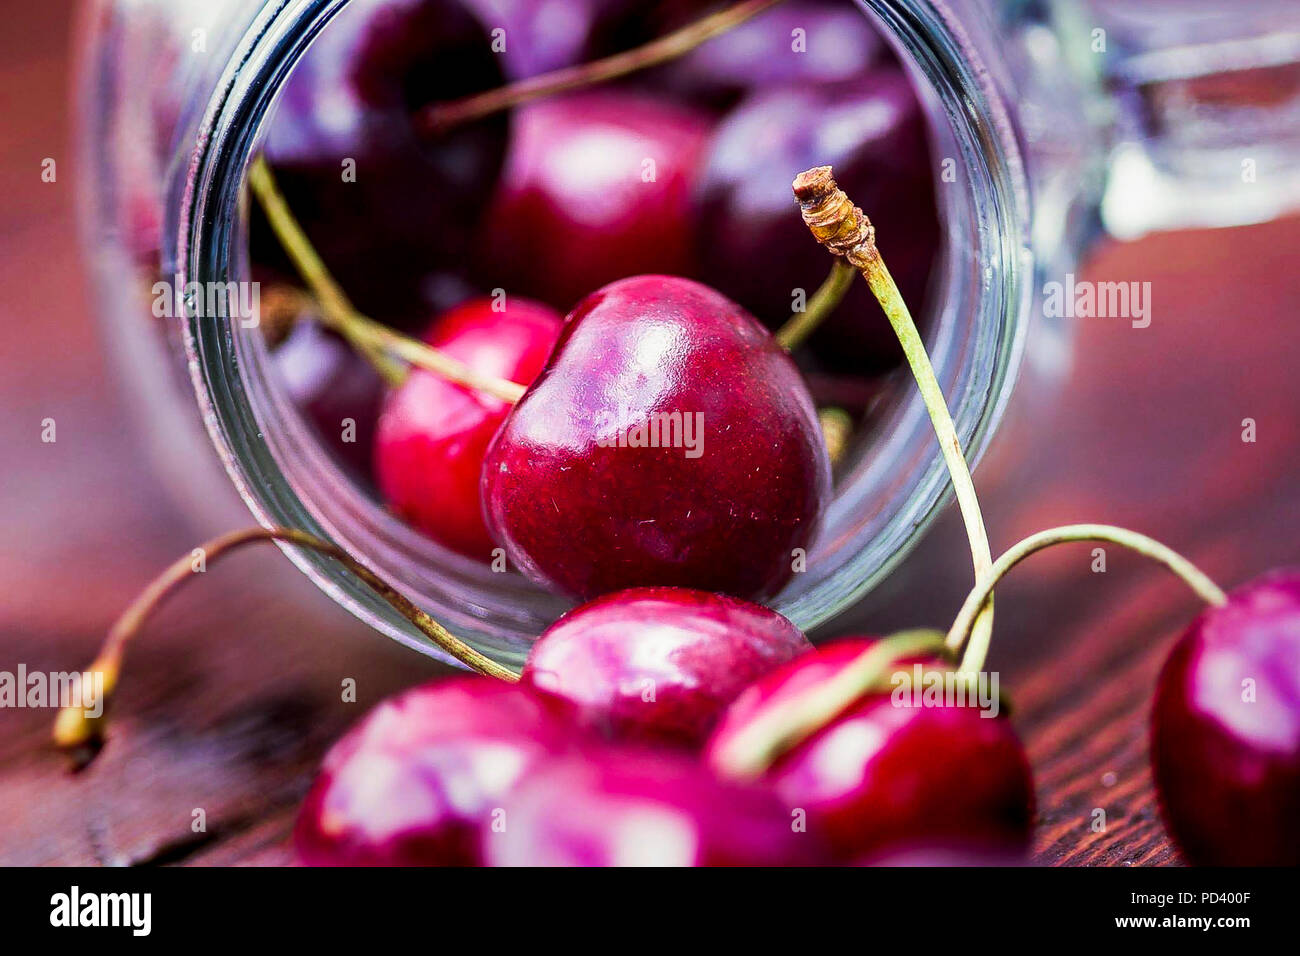 Fresh Cherries falling out of a glass jar Stock Photo